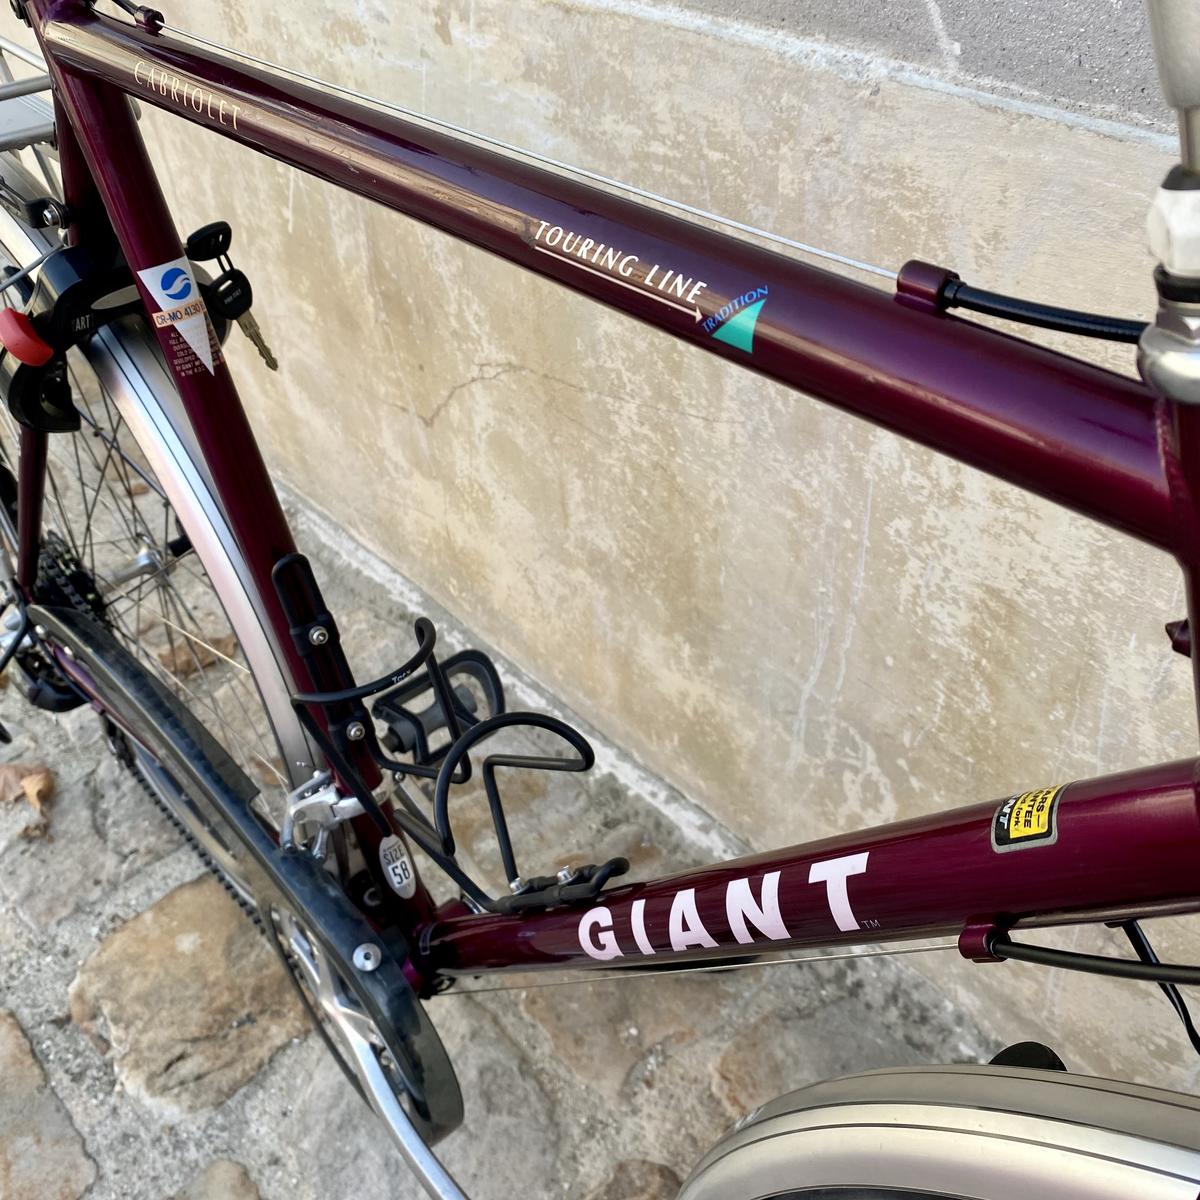 Giant - Touring Line